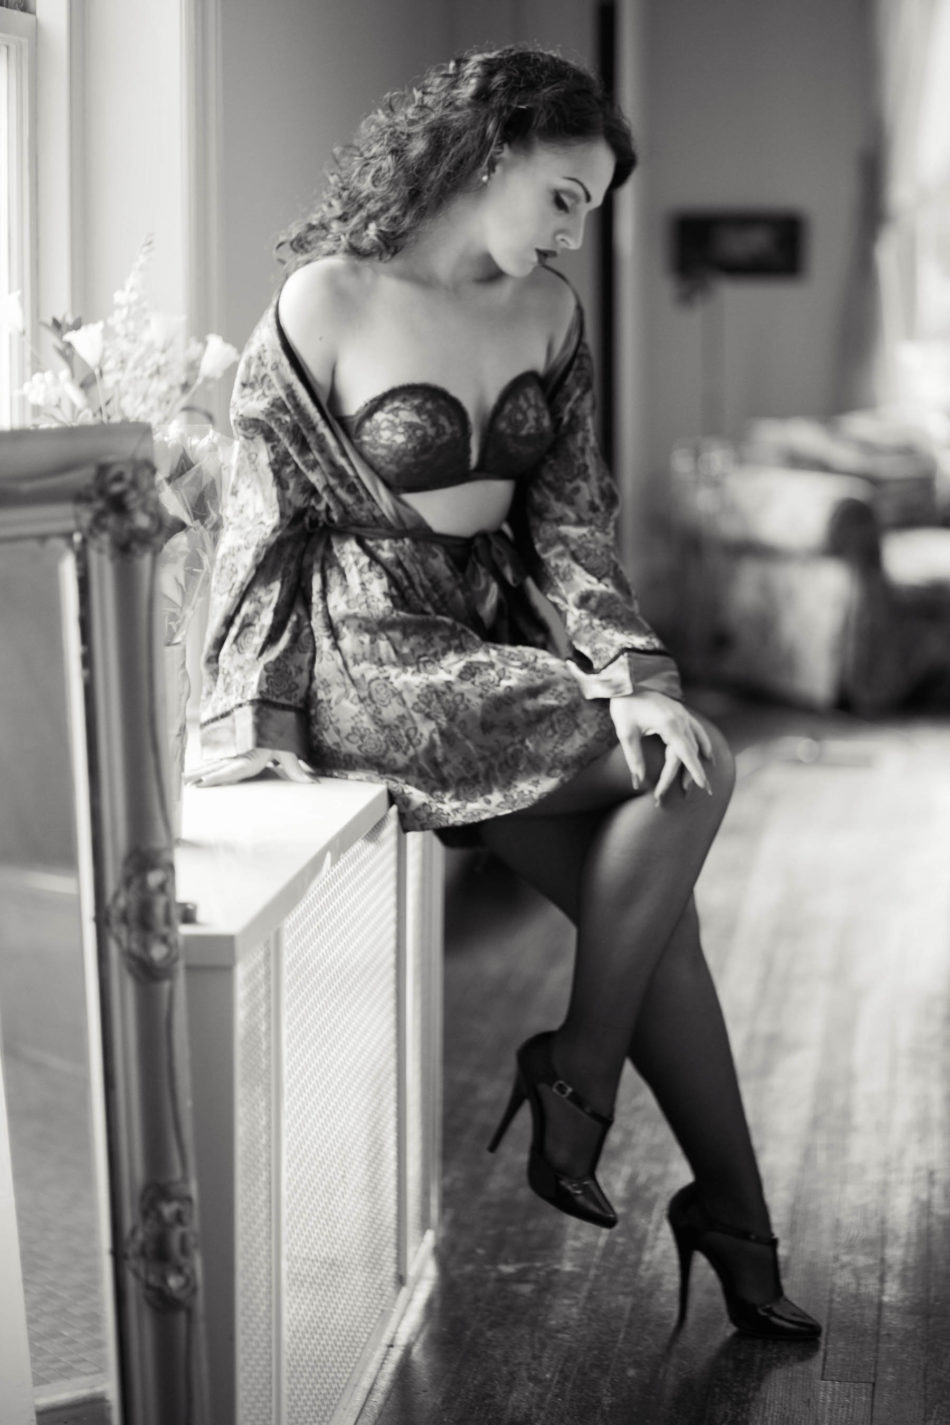 Ms A wears a retro green silk robe and lacy black lingerie outfit with stockings and heels, Boudoir Photography, Charleston, SC. Kate Timbers Photography. http://katetimbers.com